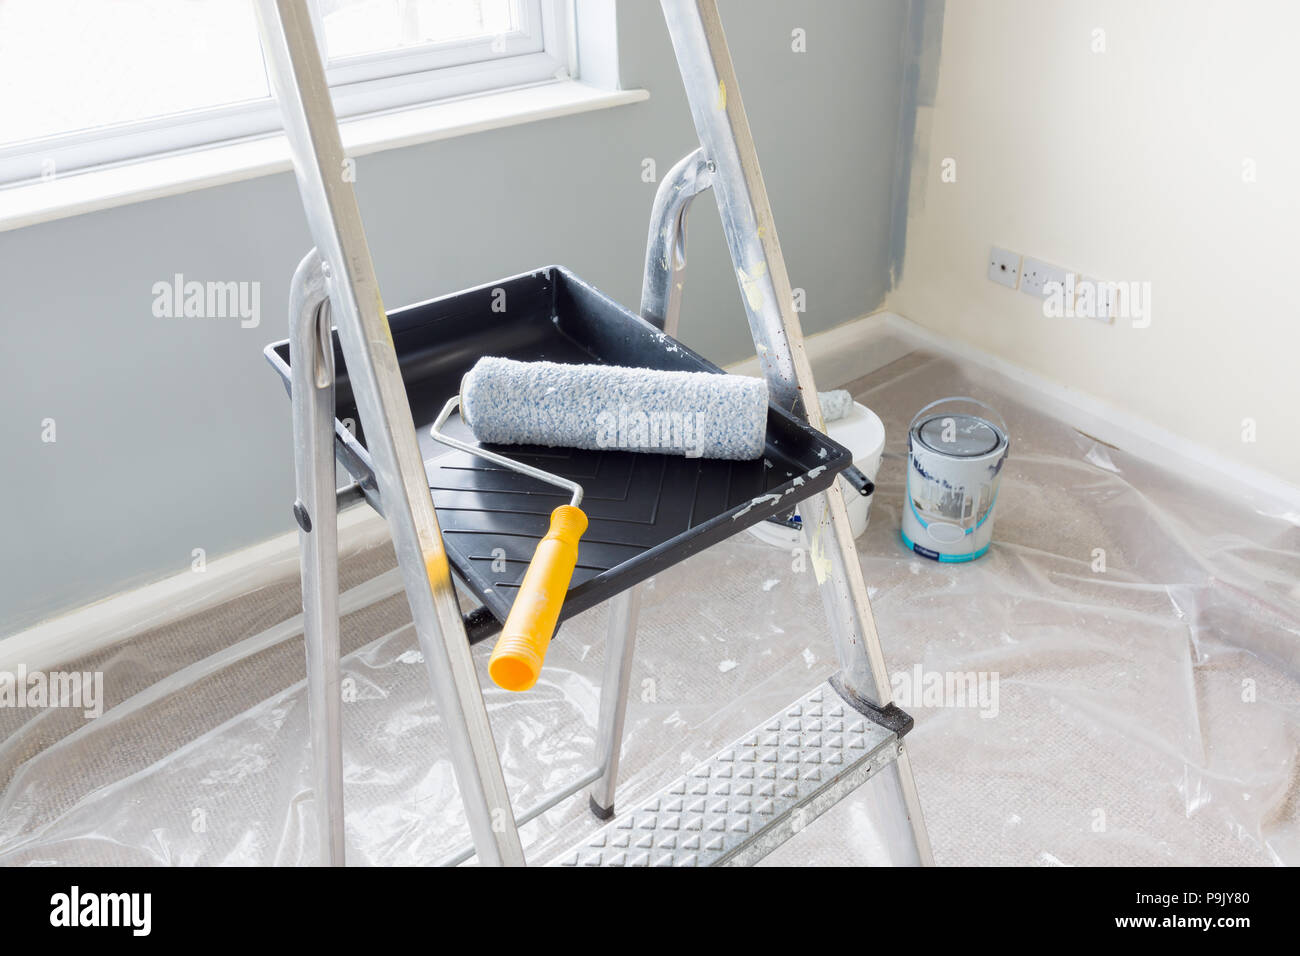 Painting and decorating with a roller and tray on a set of metal step ladders with cans of paint and a dust sheet in the background Stock Photo